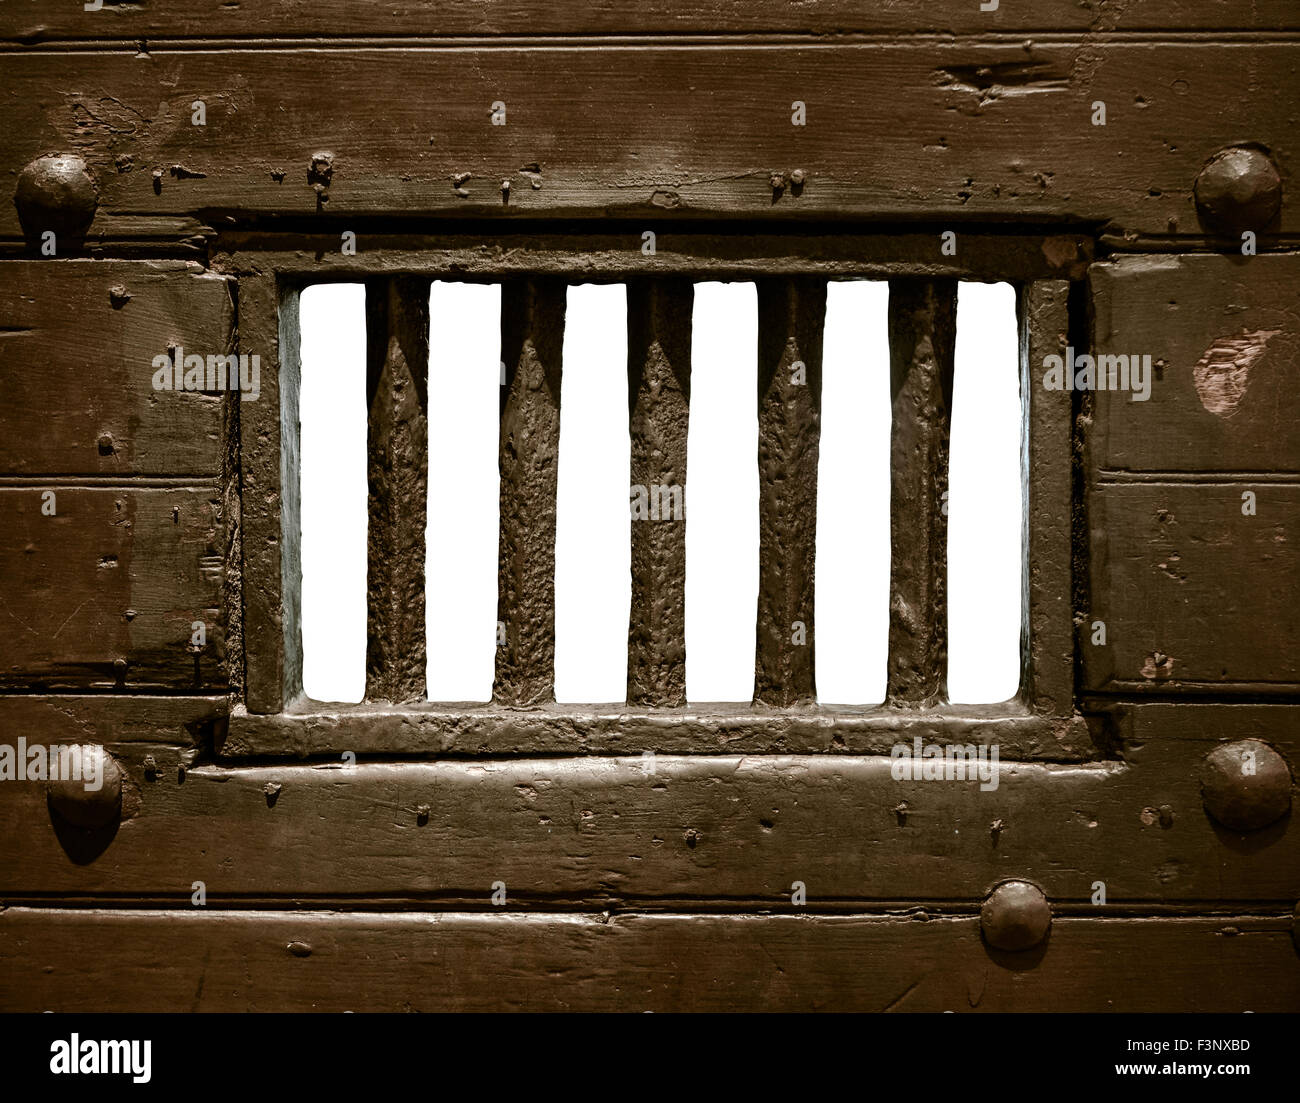 Detail Of The Bars Of An Old Prison Or Jail Cell Door Stock Photo